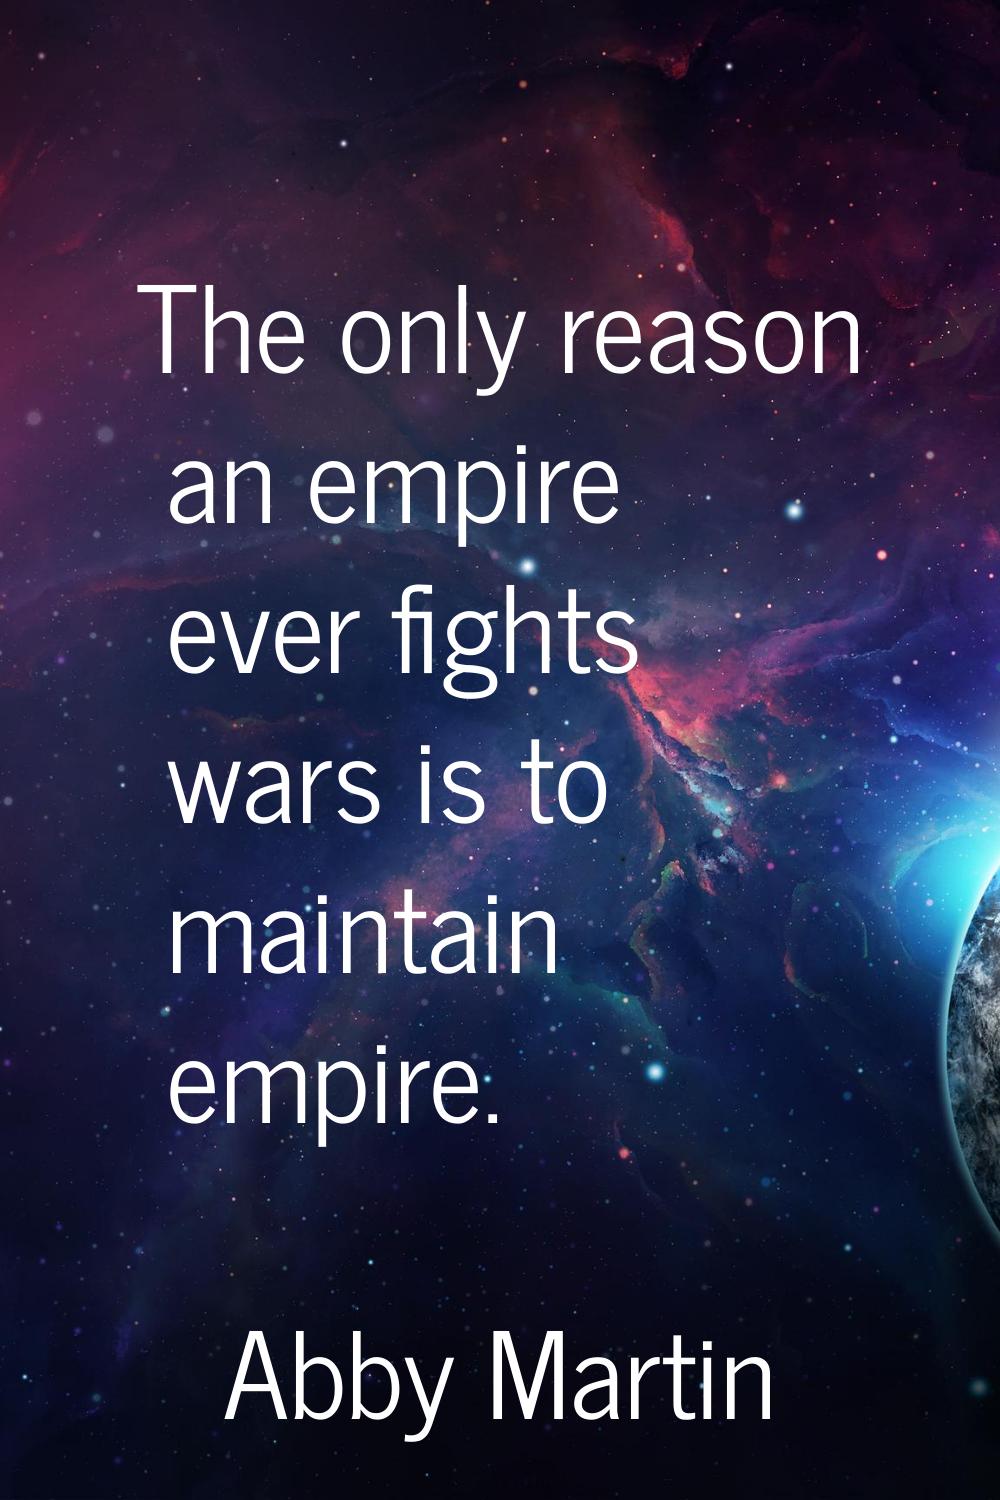 The only reason an empire ever fights wars is to maintain empire.